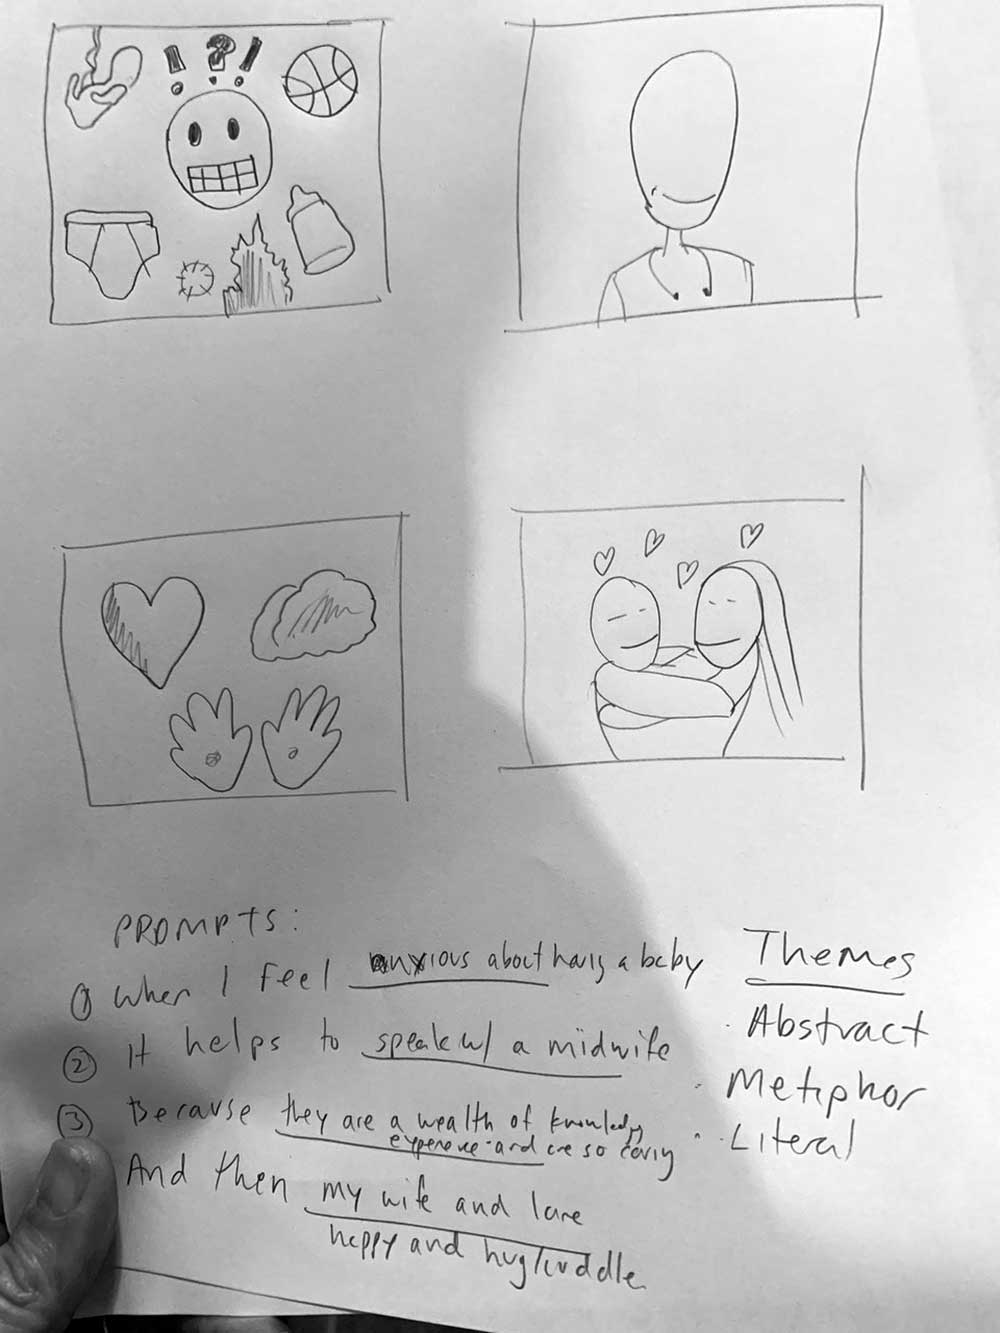 Participant’s comic: “When I feel anxious about having a baby. It helps to speak with a midwife. Because they are a wealth of knowledge, experience and are so caring. And then my wife and I are happy and hug/cuddle.”